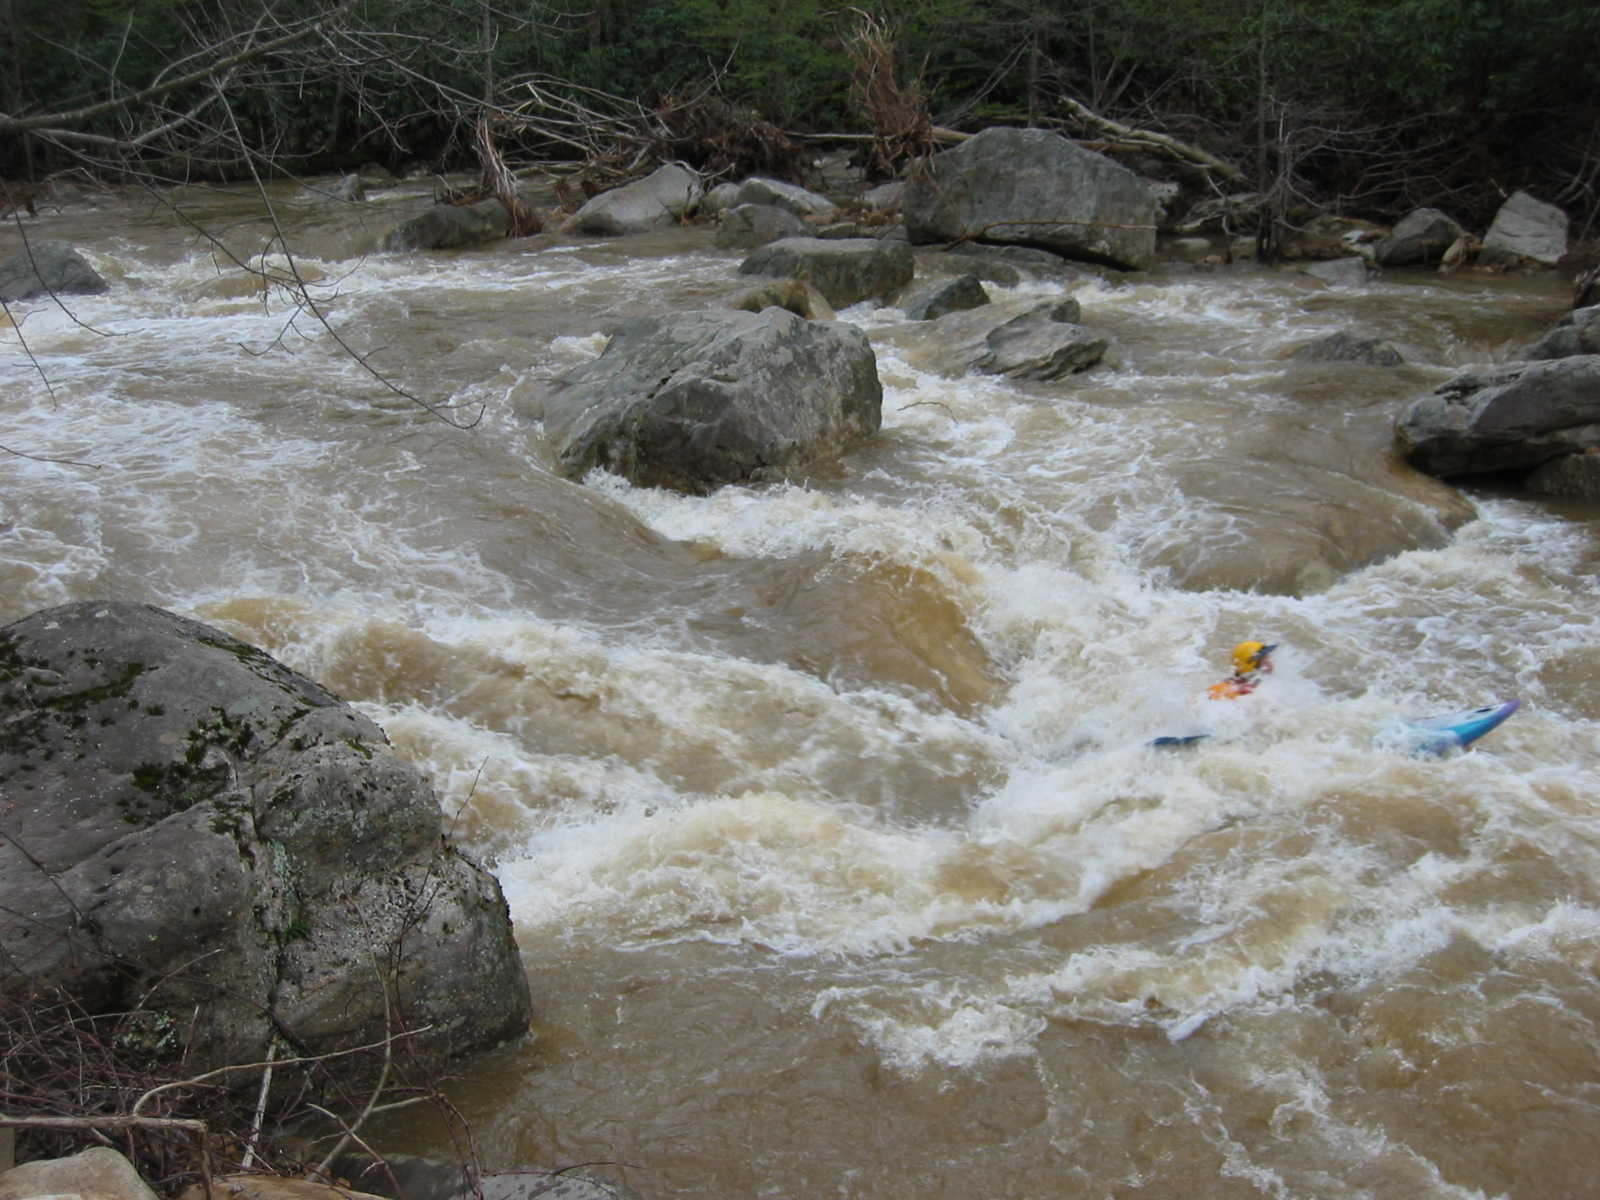 Scott Zetterstrom in main hole of the big South Fork rapid (Photo by Lou Campagna - 4/26/04)